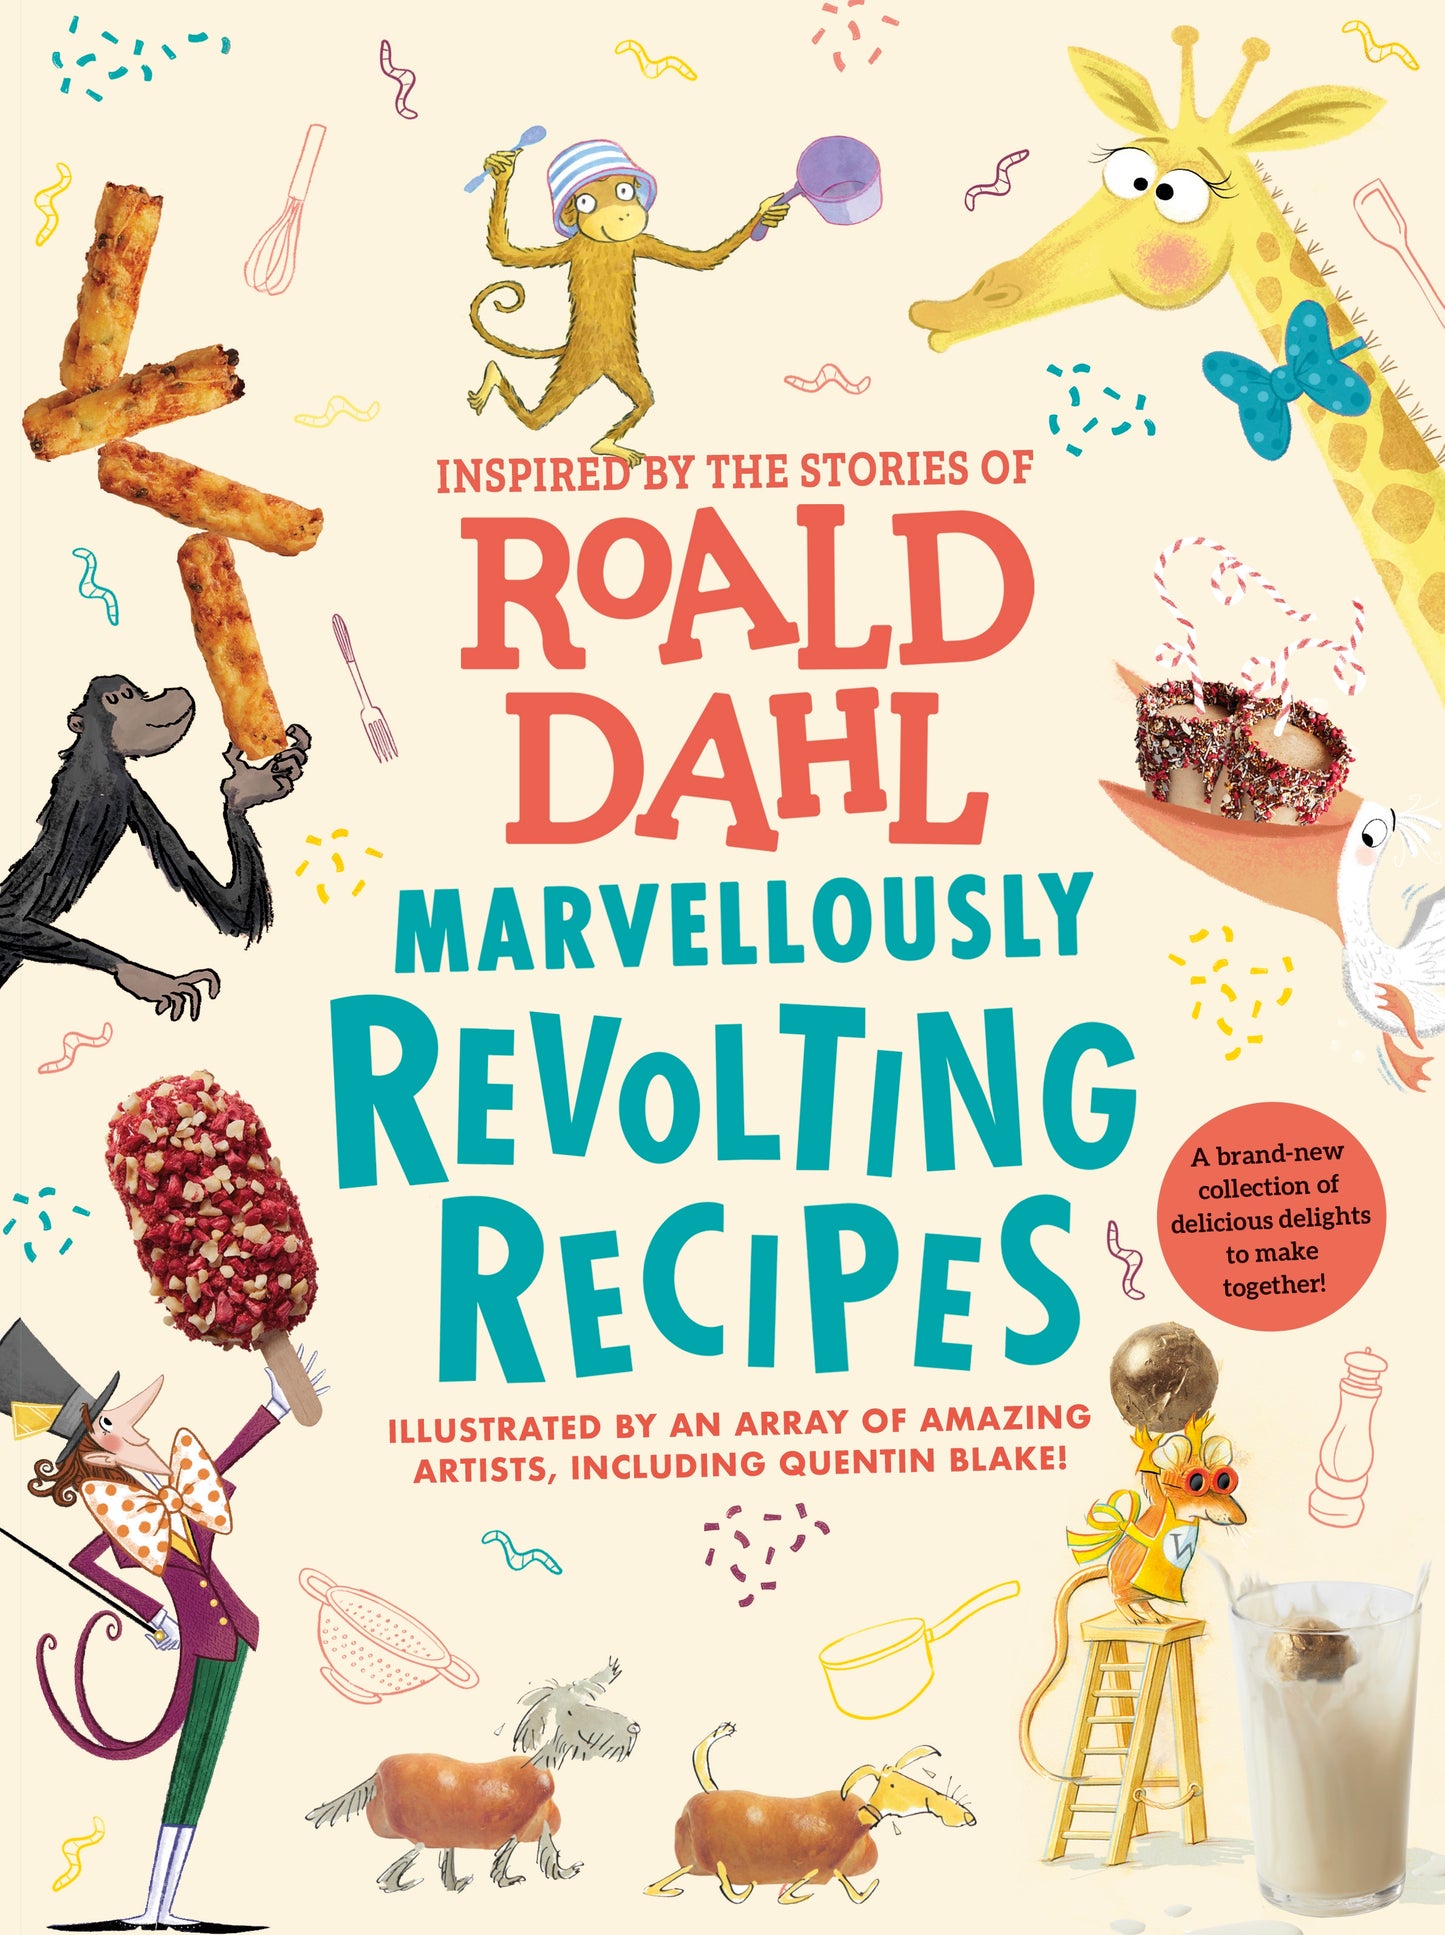 Marvellously Revloting Recipes (signed copy by E.C. Woodard, contributing artist)